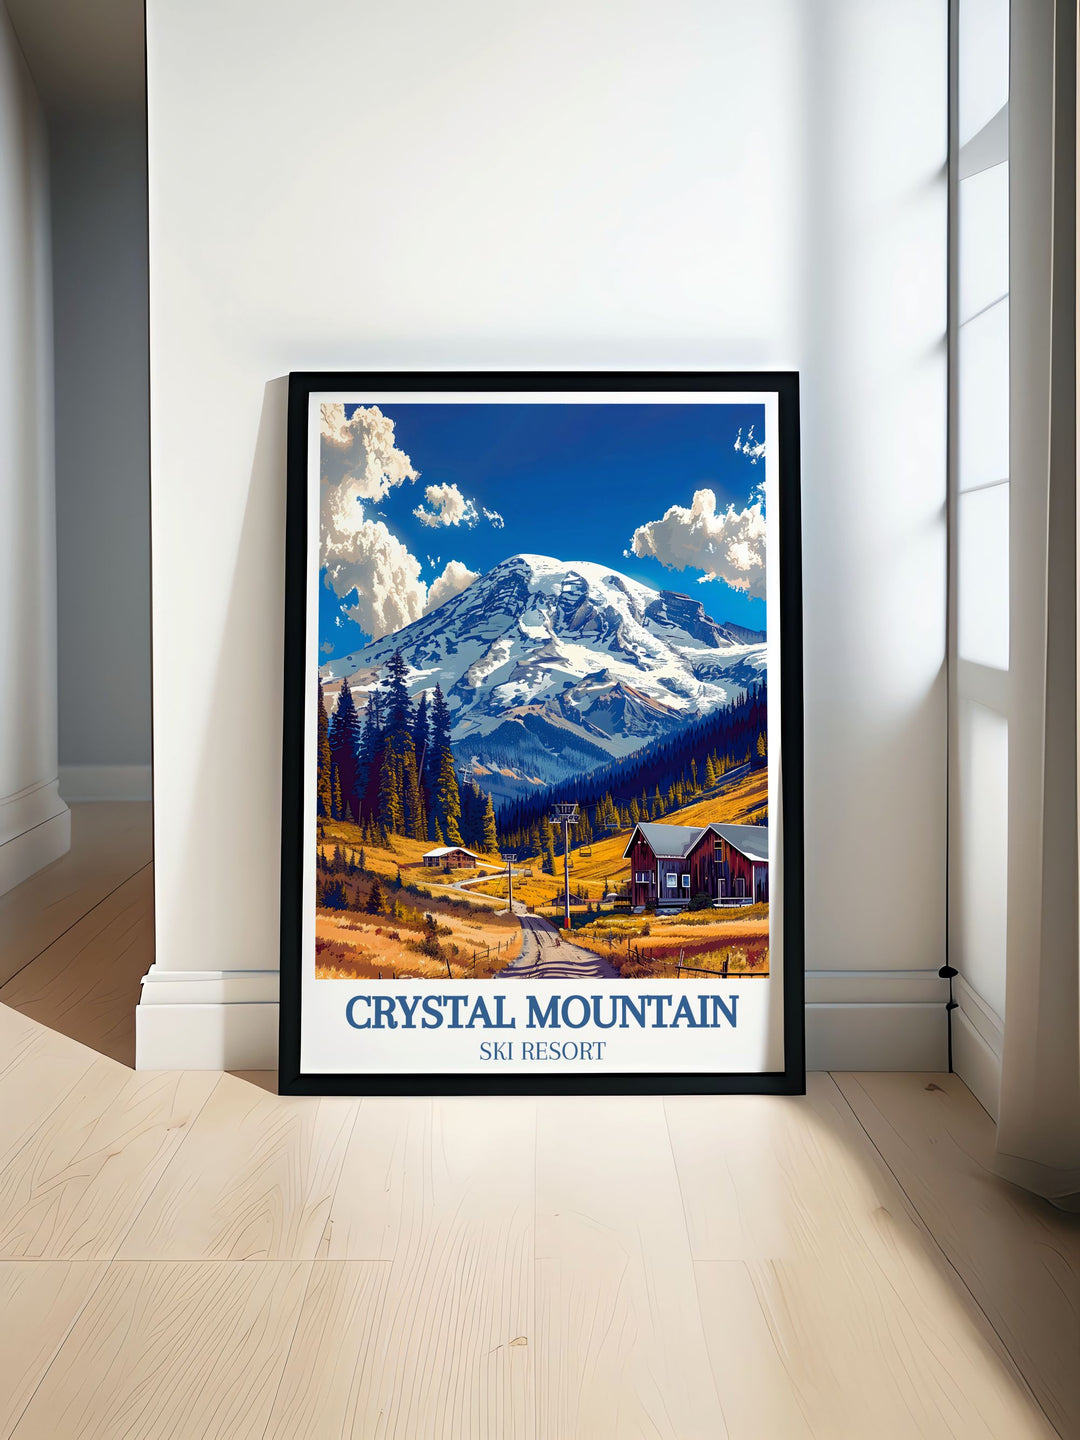 This poster captures the dynamic energy of snowboarding at Crystal Mountain, set against the iconic backdrop of Washingtons Cascade Range, ideal for thrill seekers.